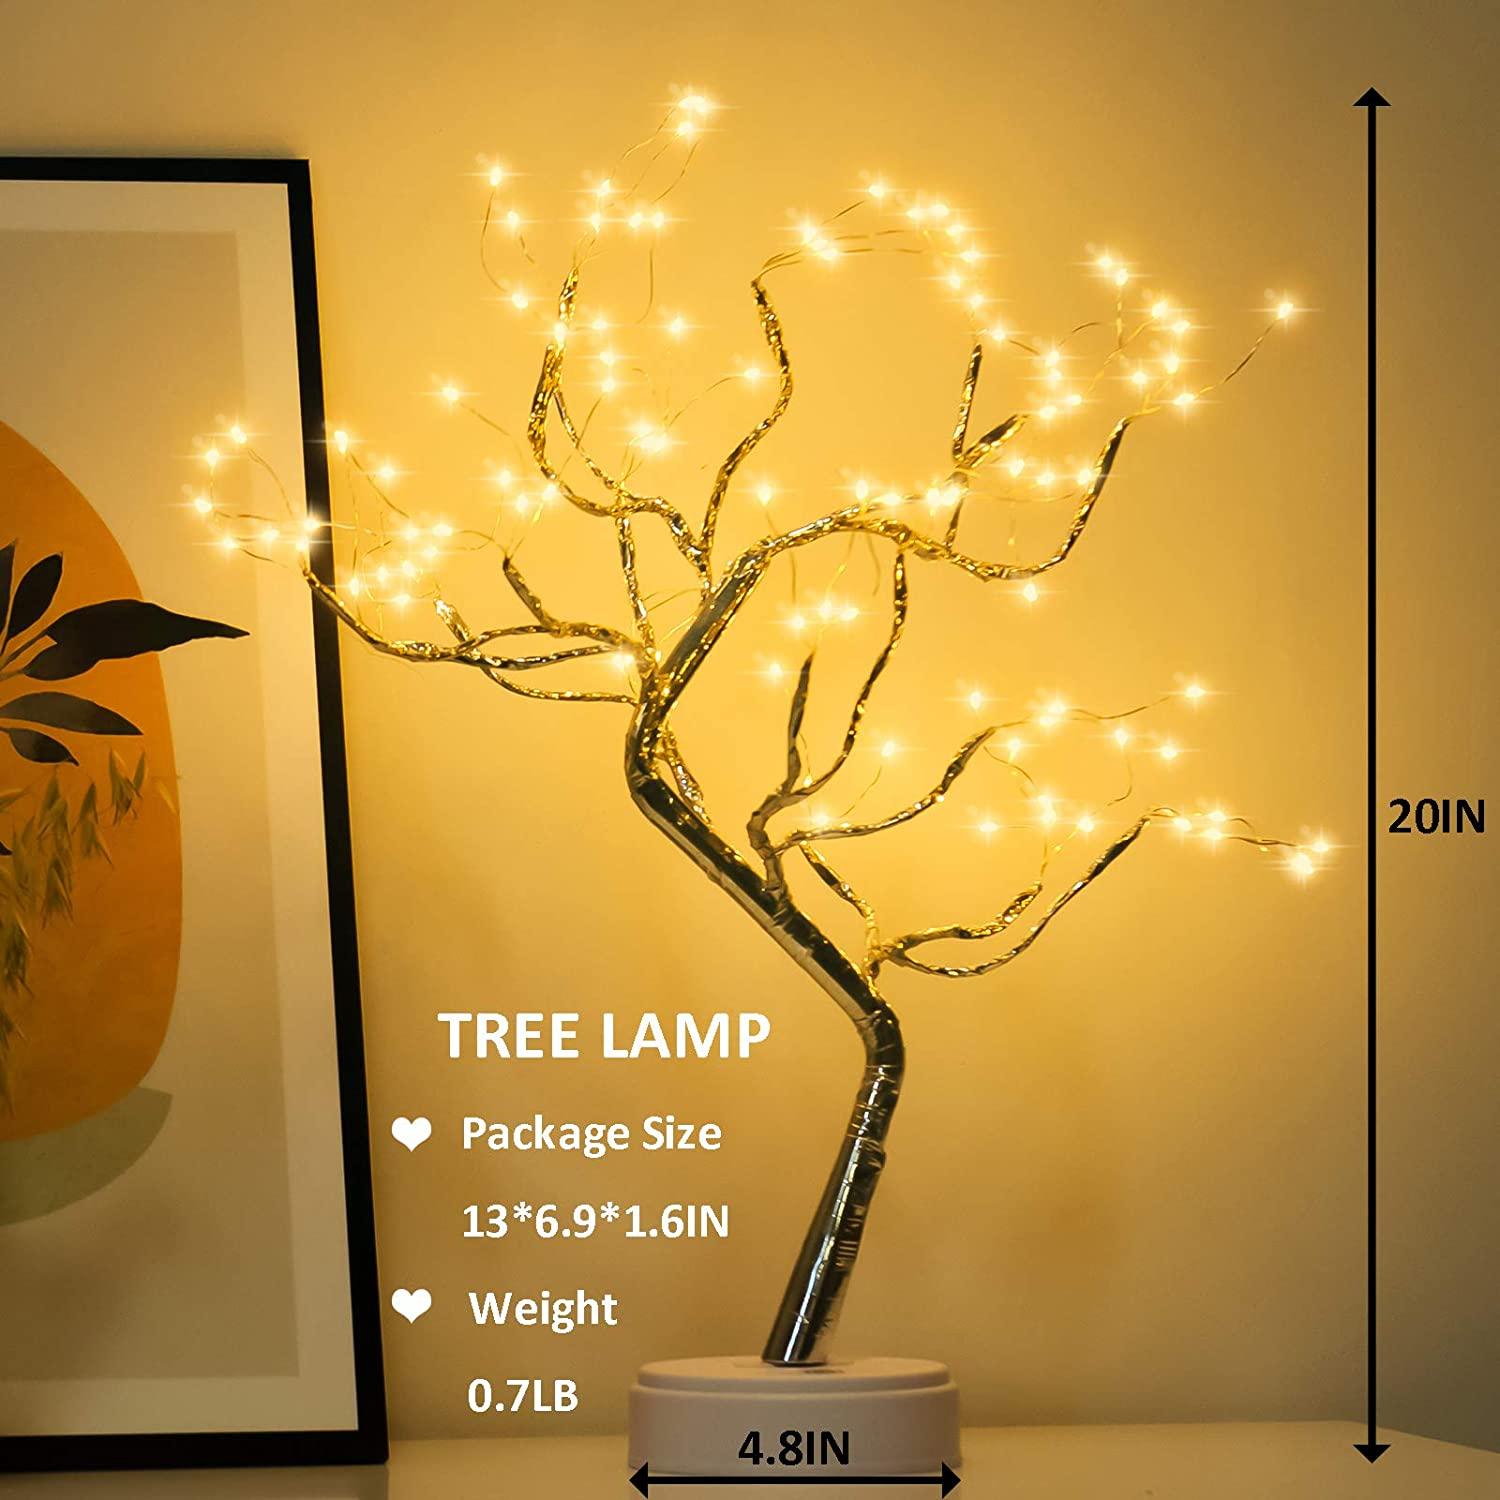 Tabletop Bonsai Tree Light with 108 LED Copper Wire String Lights, DIY – If  you say i do